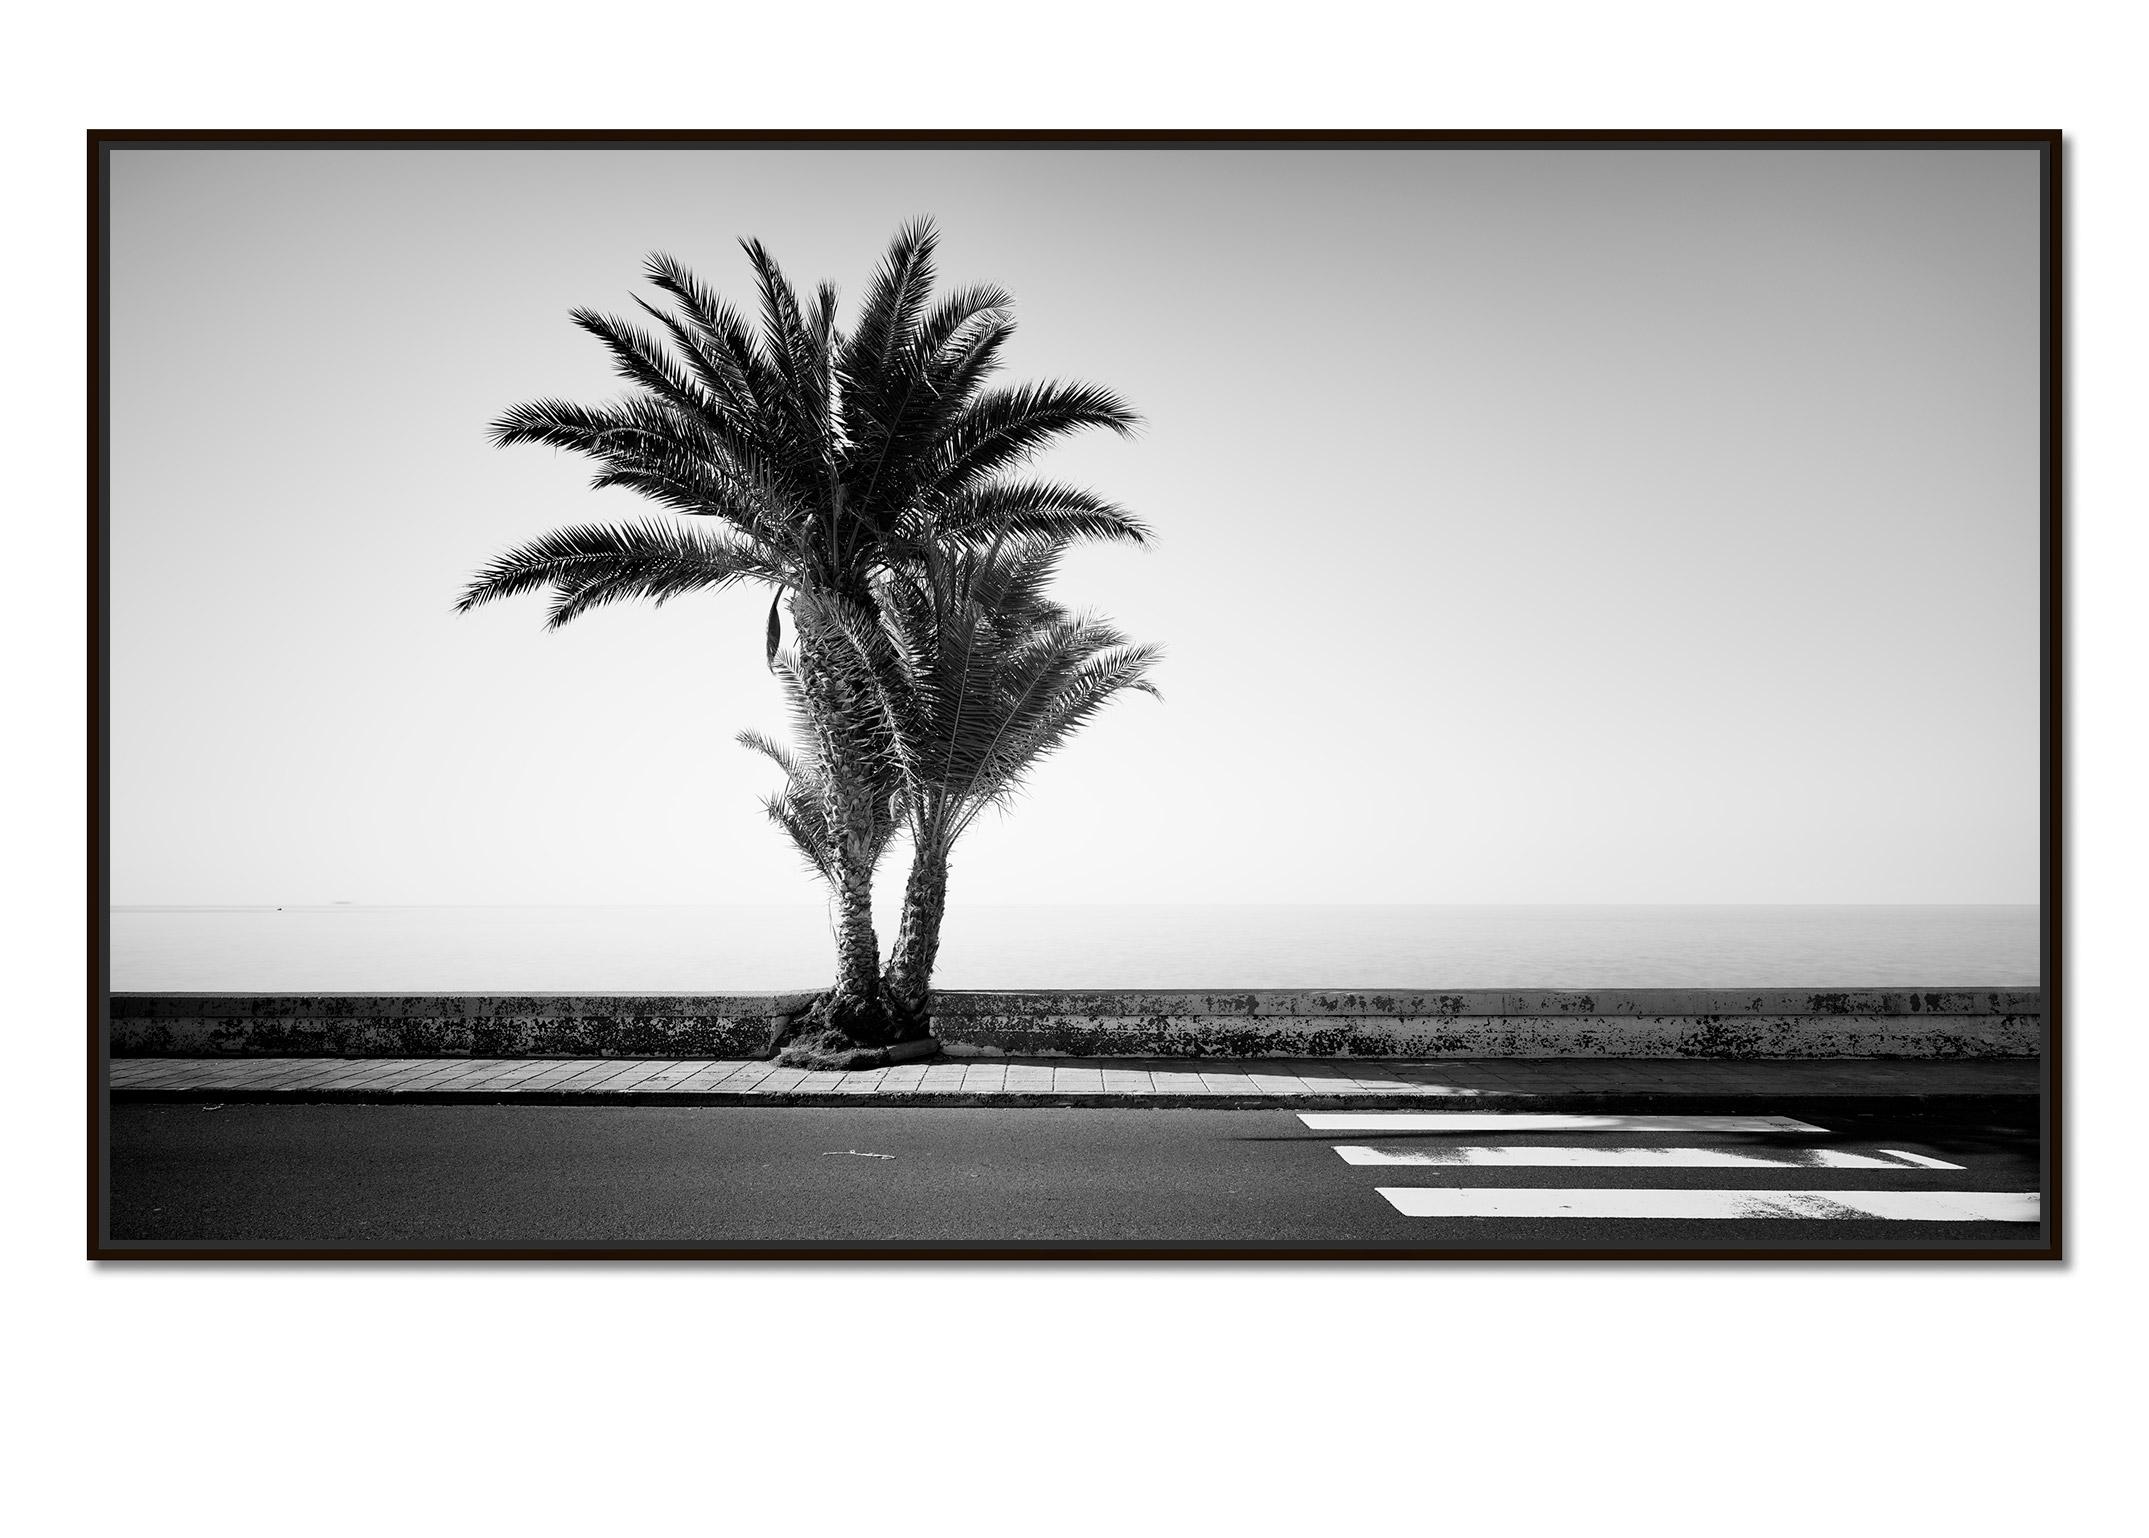 Palm Trees on the roadside, Portugal, Black and white photography, landscape - Photograph by Gerald Berghammer